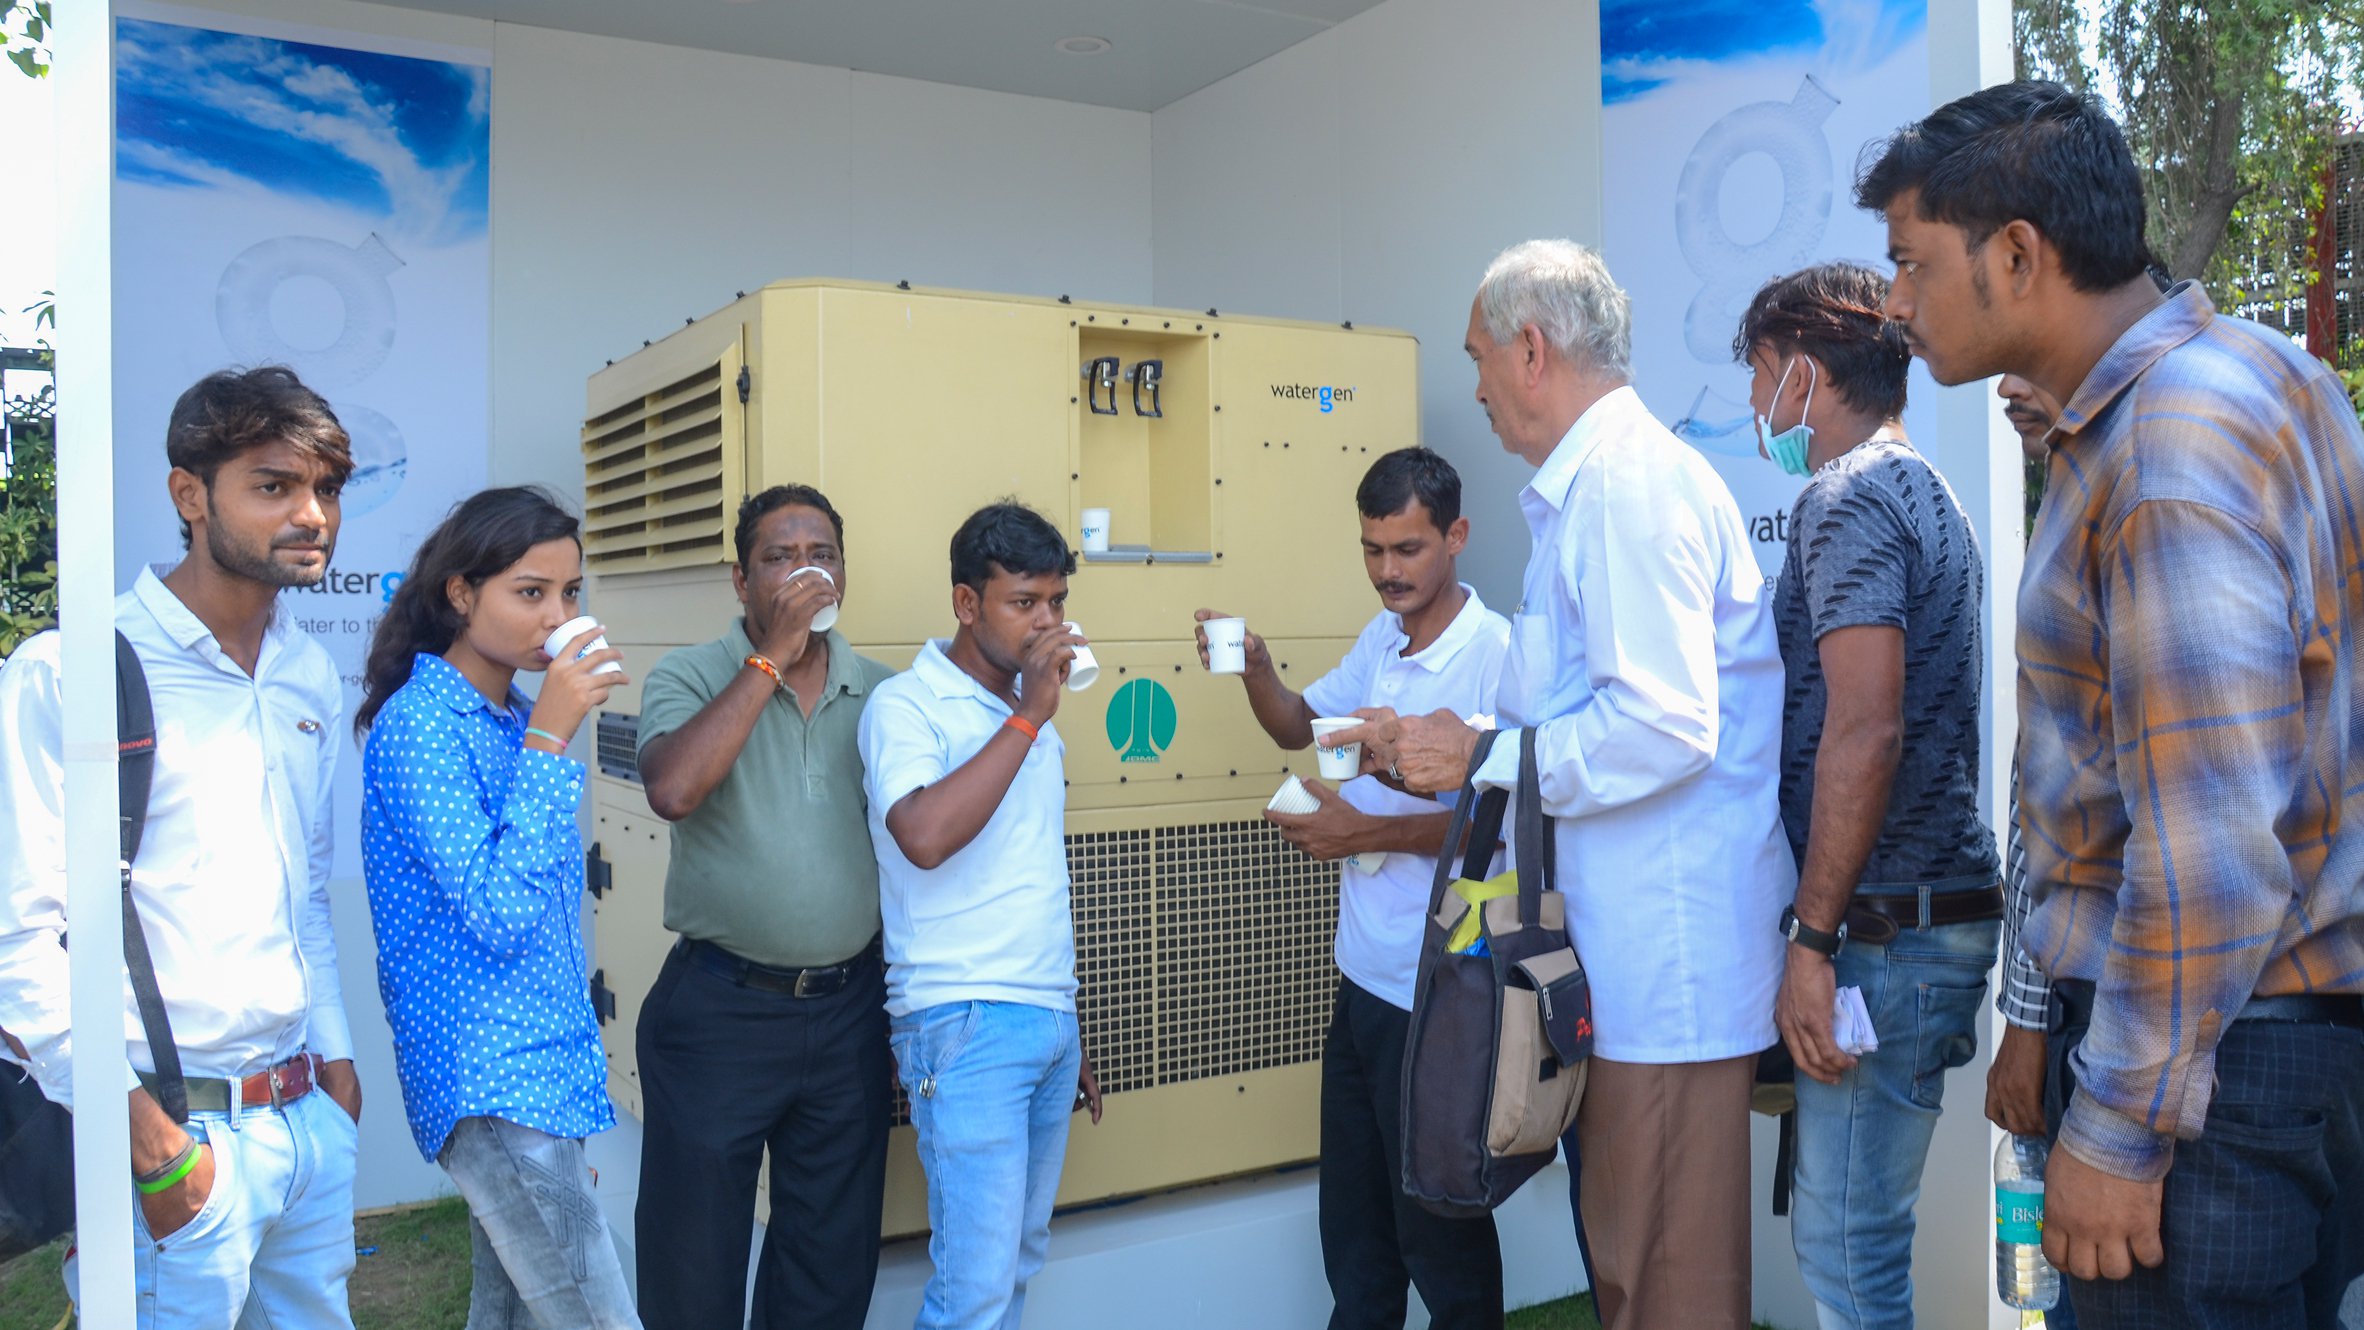 Machine that Extracts Water from Air Repurposed for Humanitarian Efforts